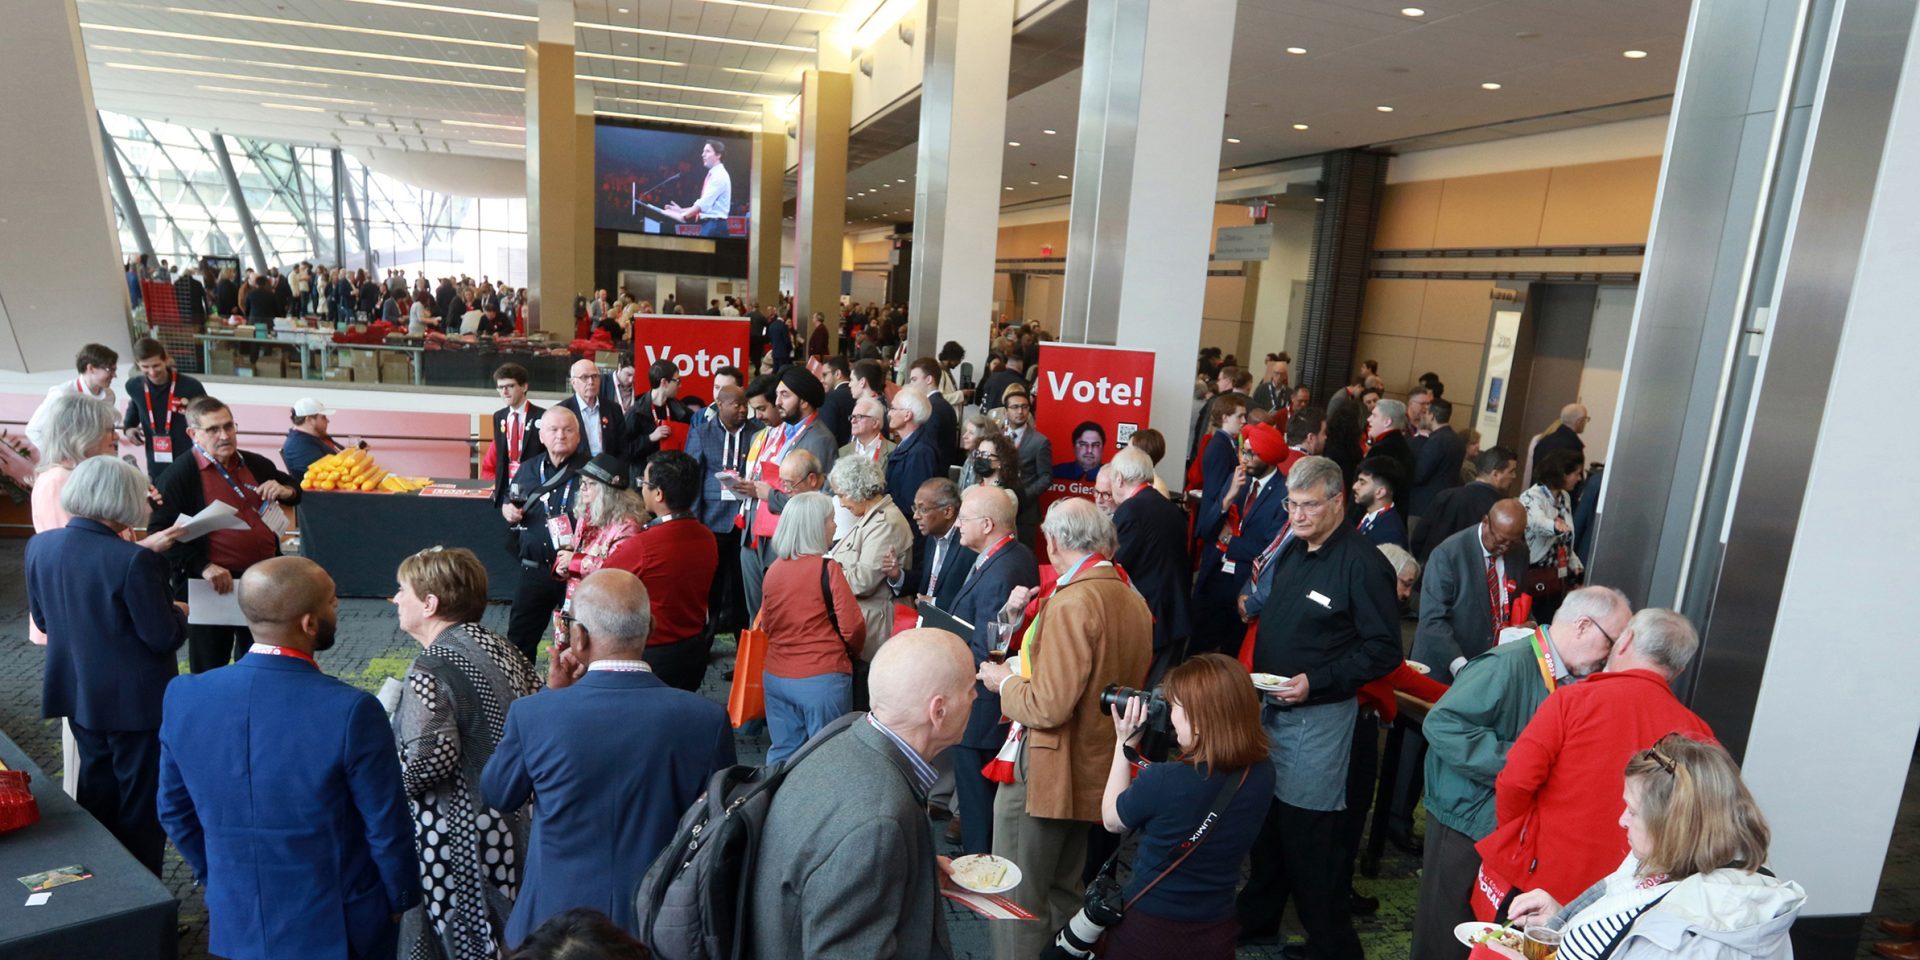 2023 Liberal National Convention, day 1. May 4, 2023 at Shaw Centre. The Hill Times photograph by Sam Garcia